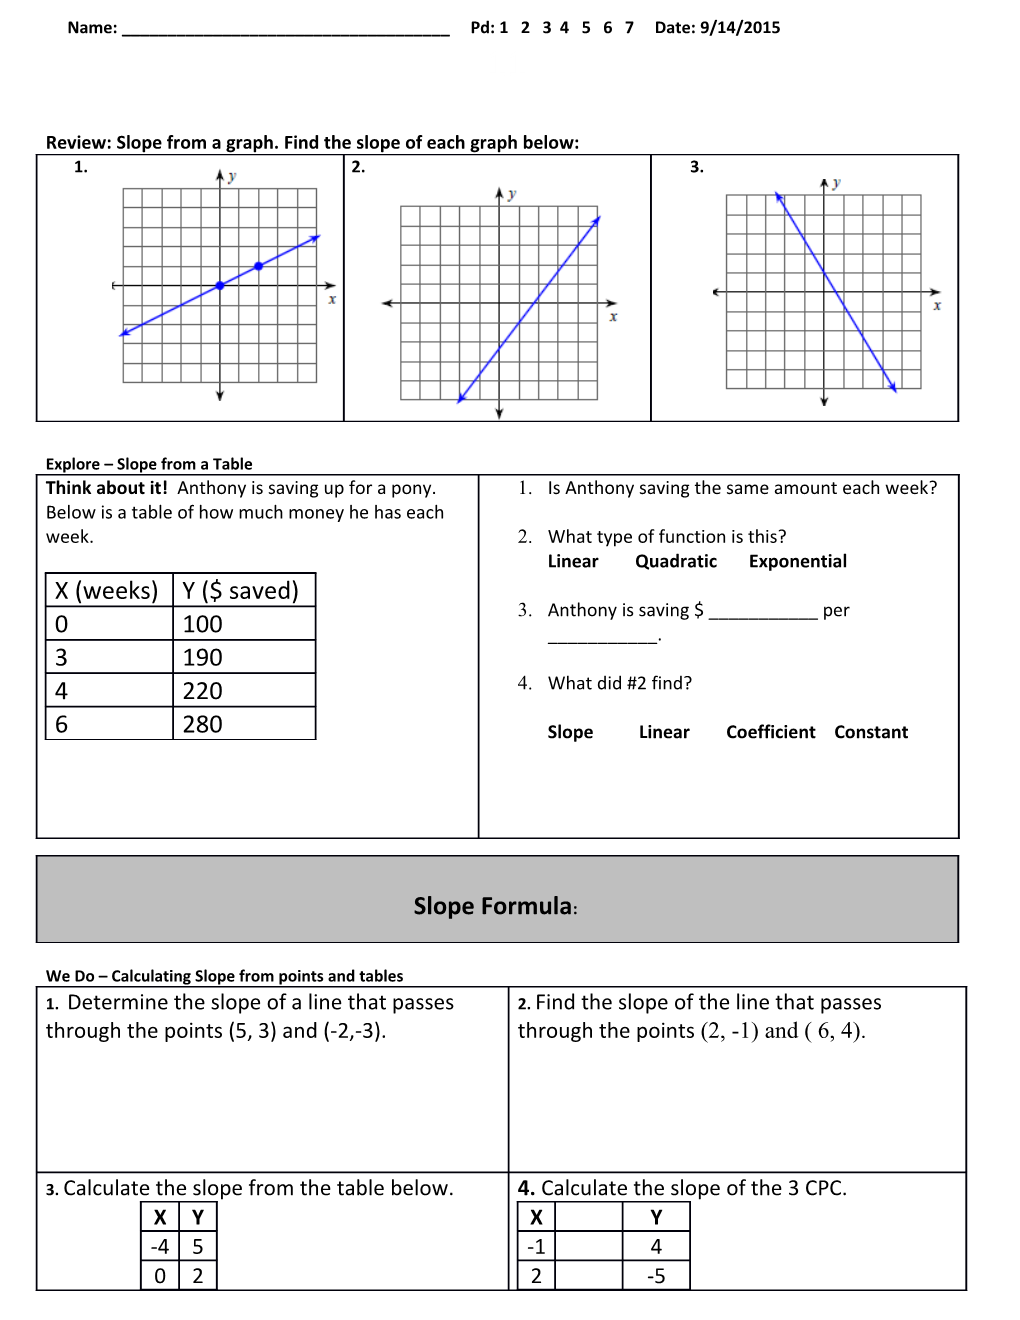 Review: Slope from a Graph. Find the Slope of Each Graph Below